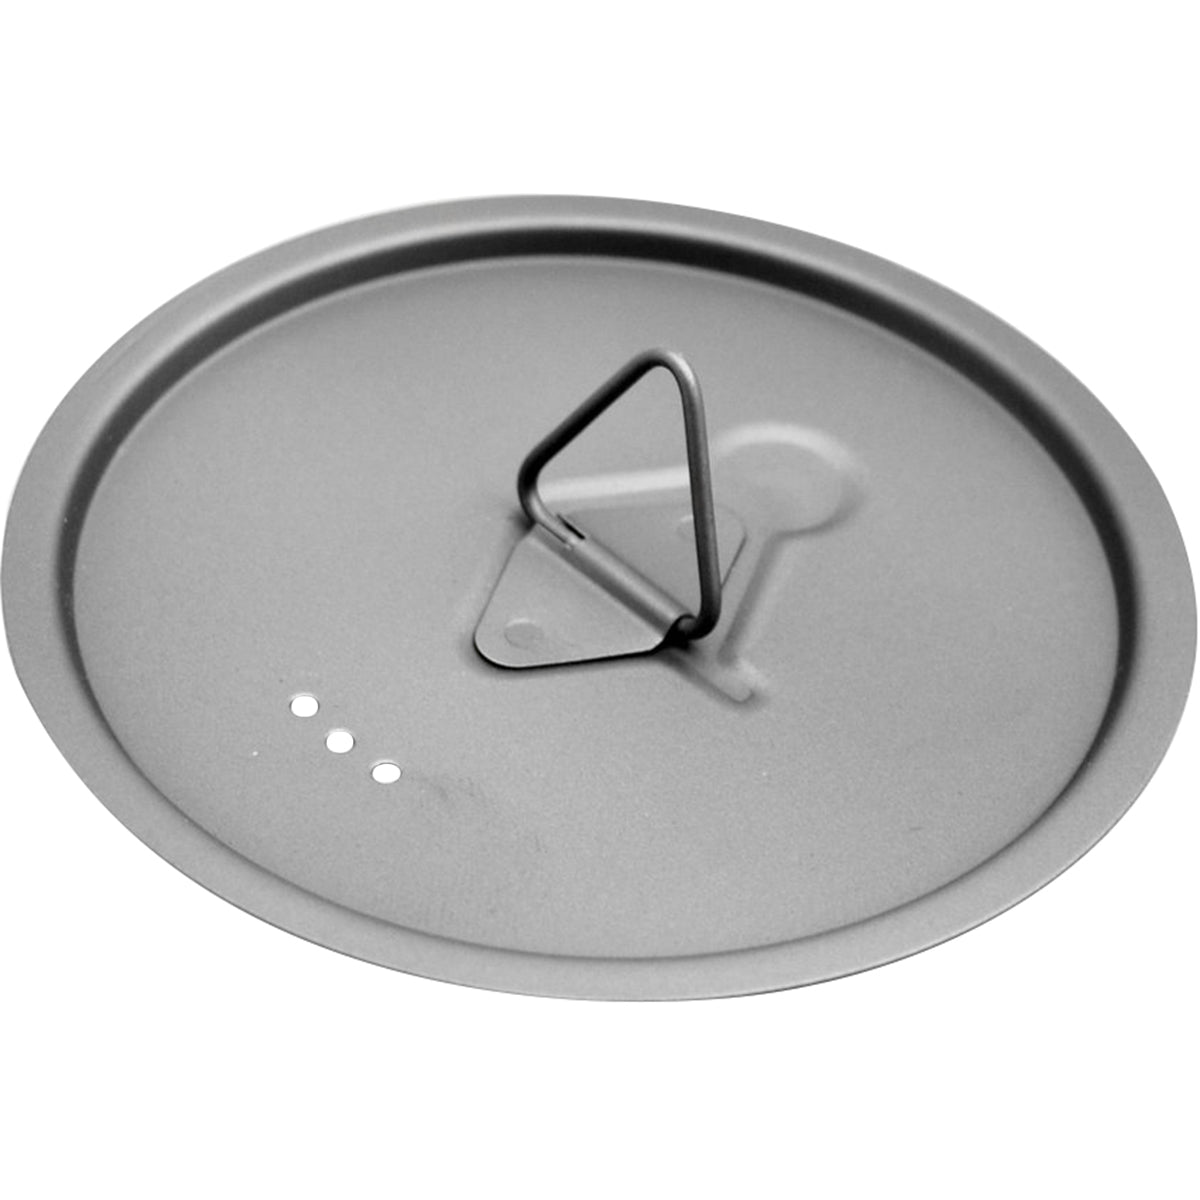 TOAKS Updated Titanium Lid for Outdoor Camping Cook Pots and Cups - 80mm TOAKS